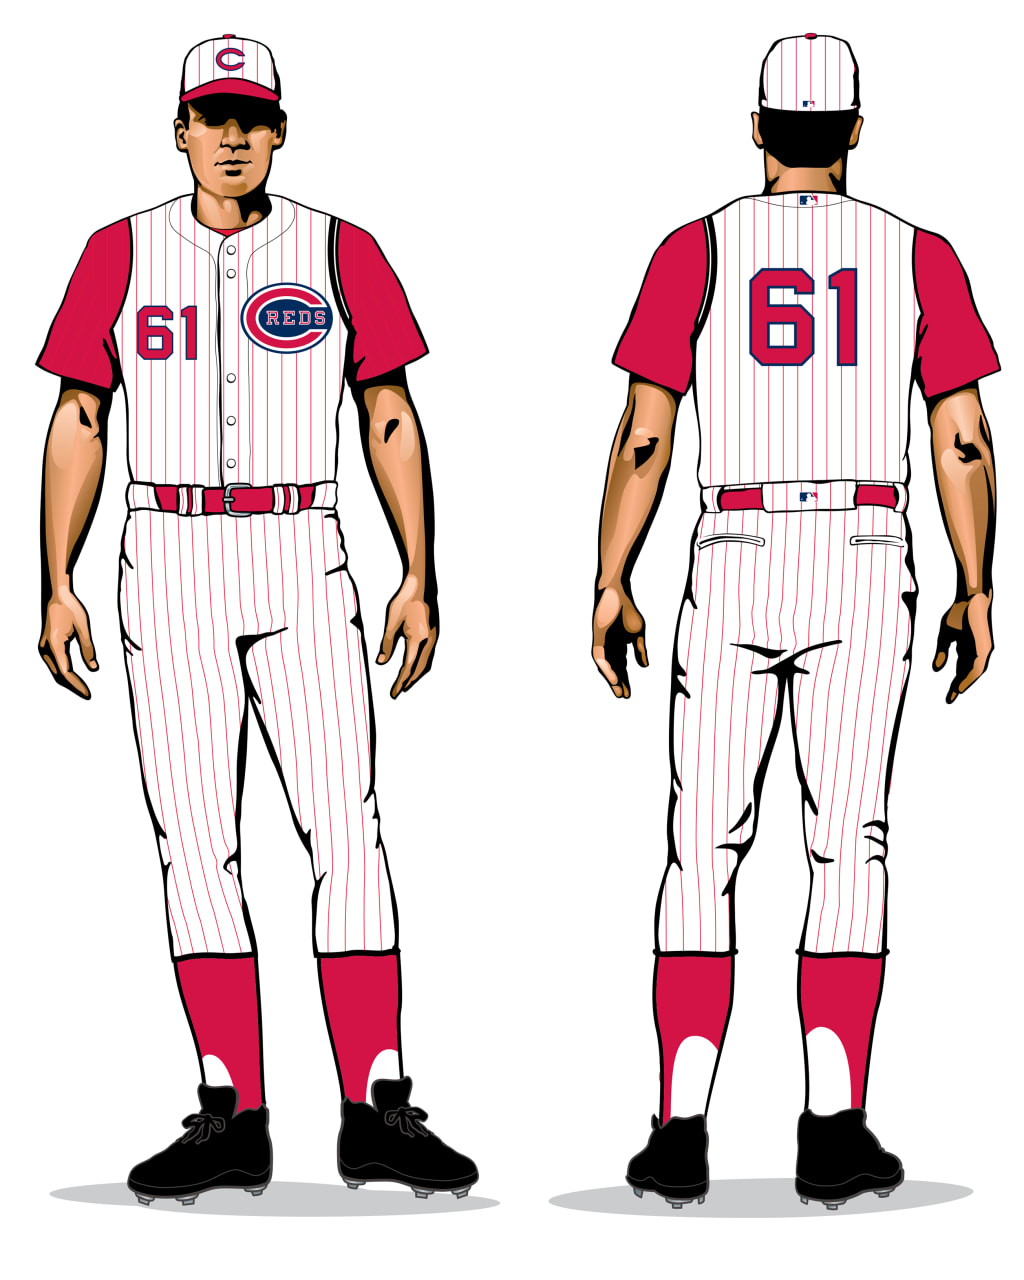 Cincinnati Reds - 1902 Home - The Reds wore this uniform style